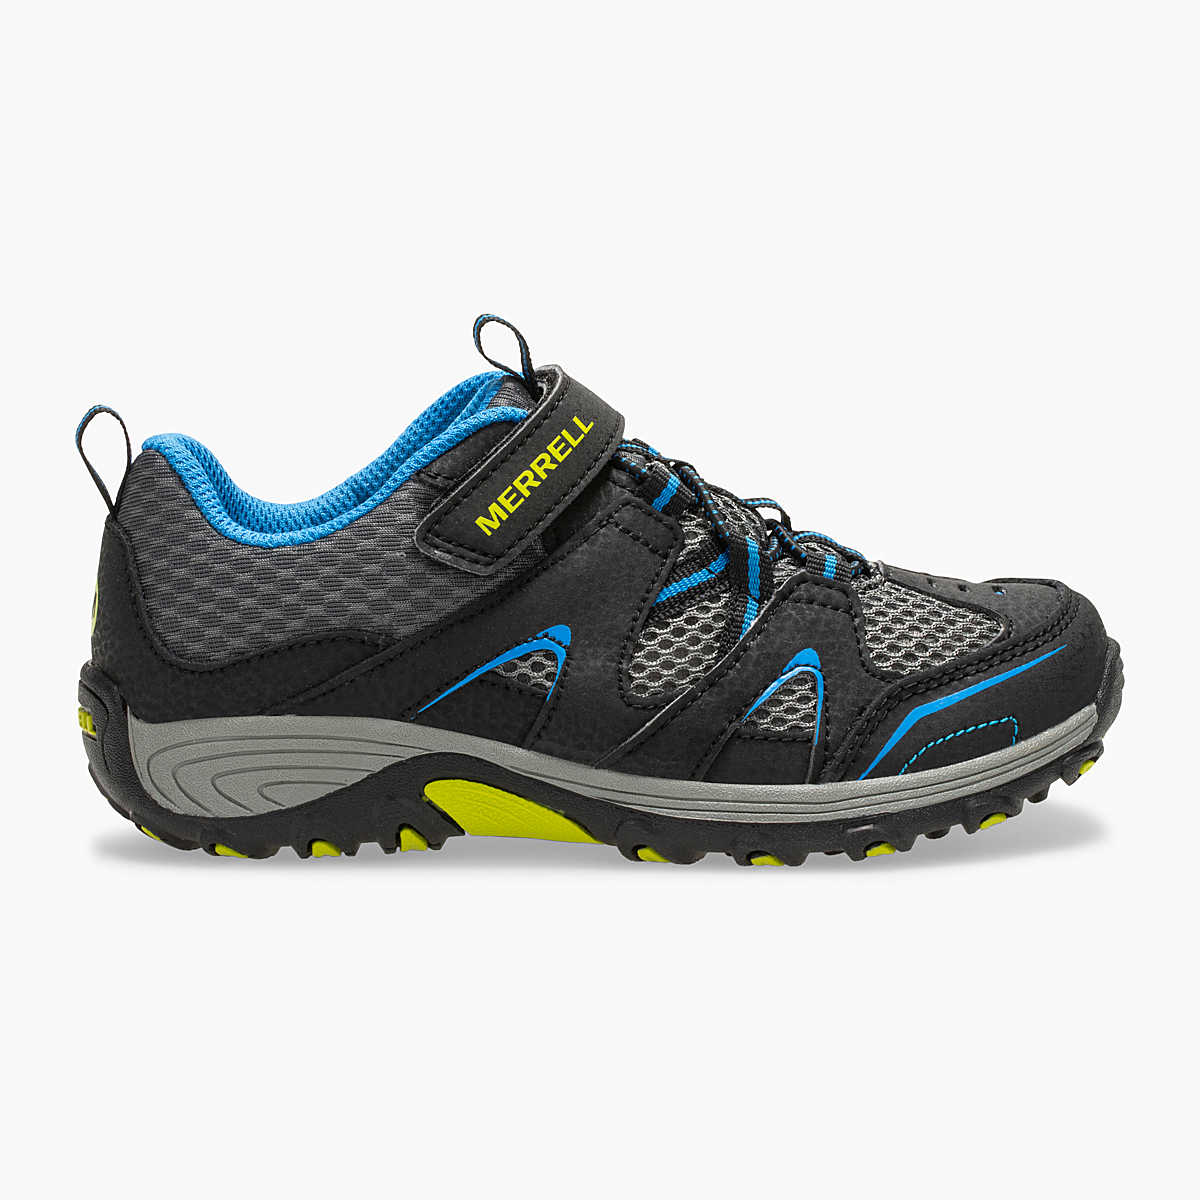 Merrill Trail Chaser Shoes